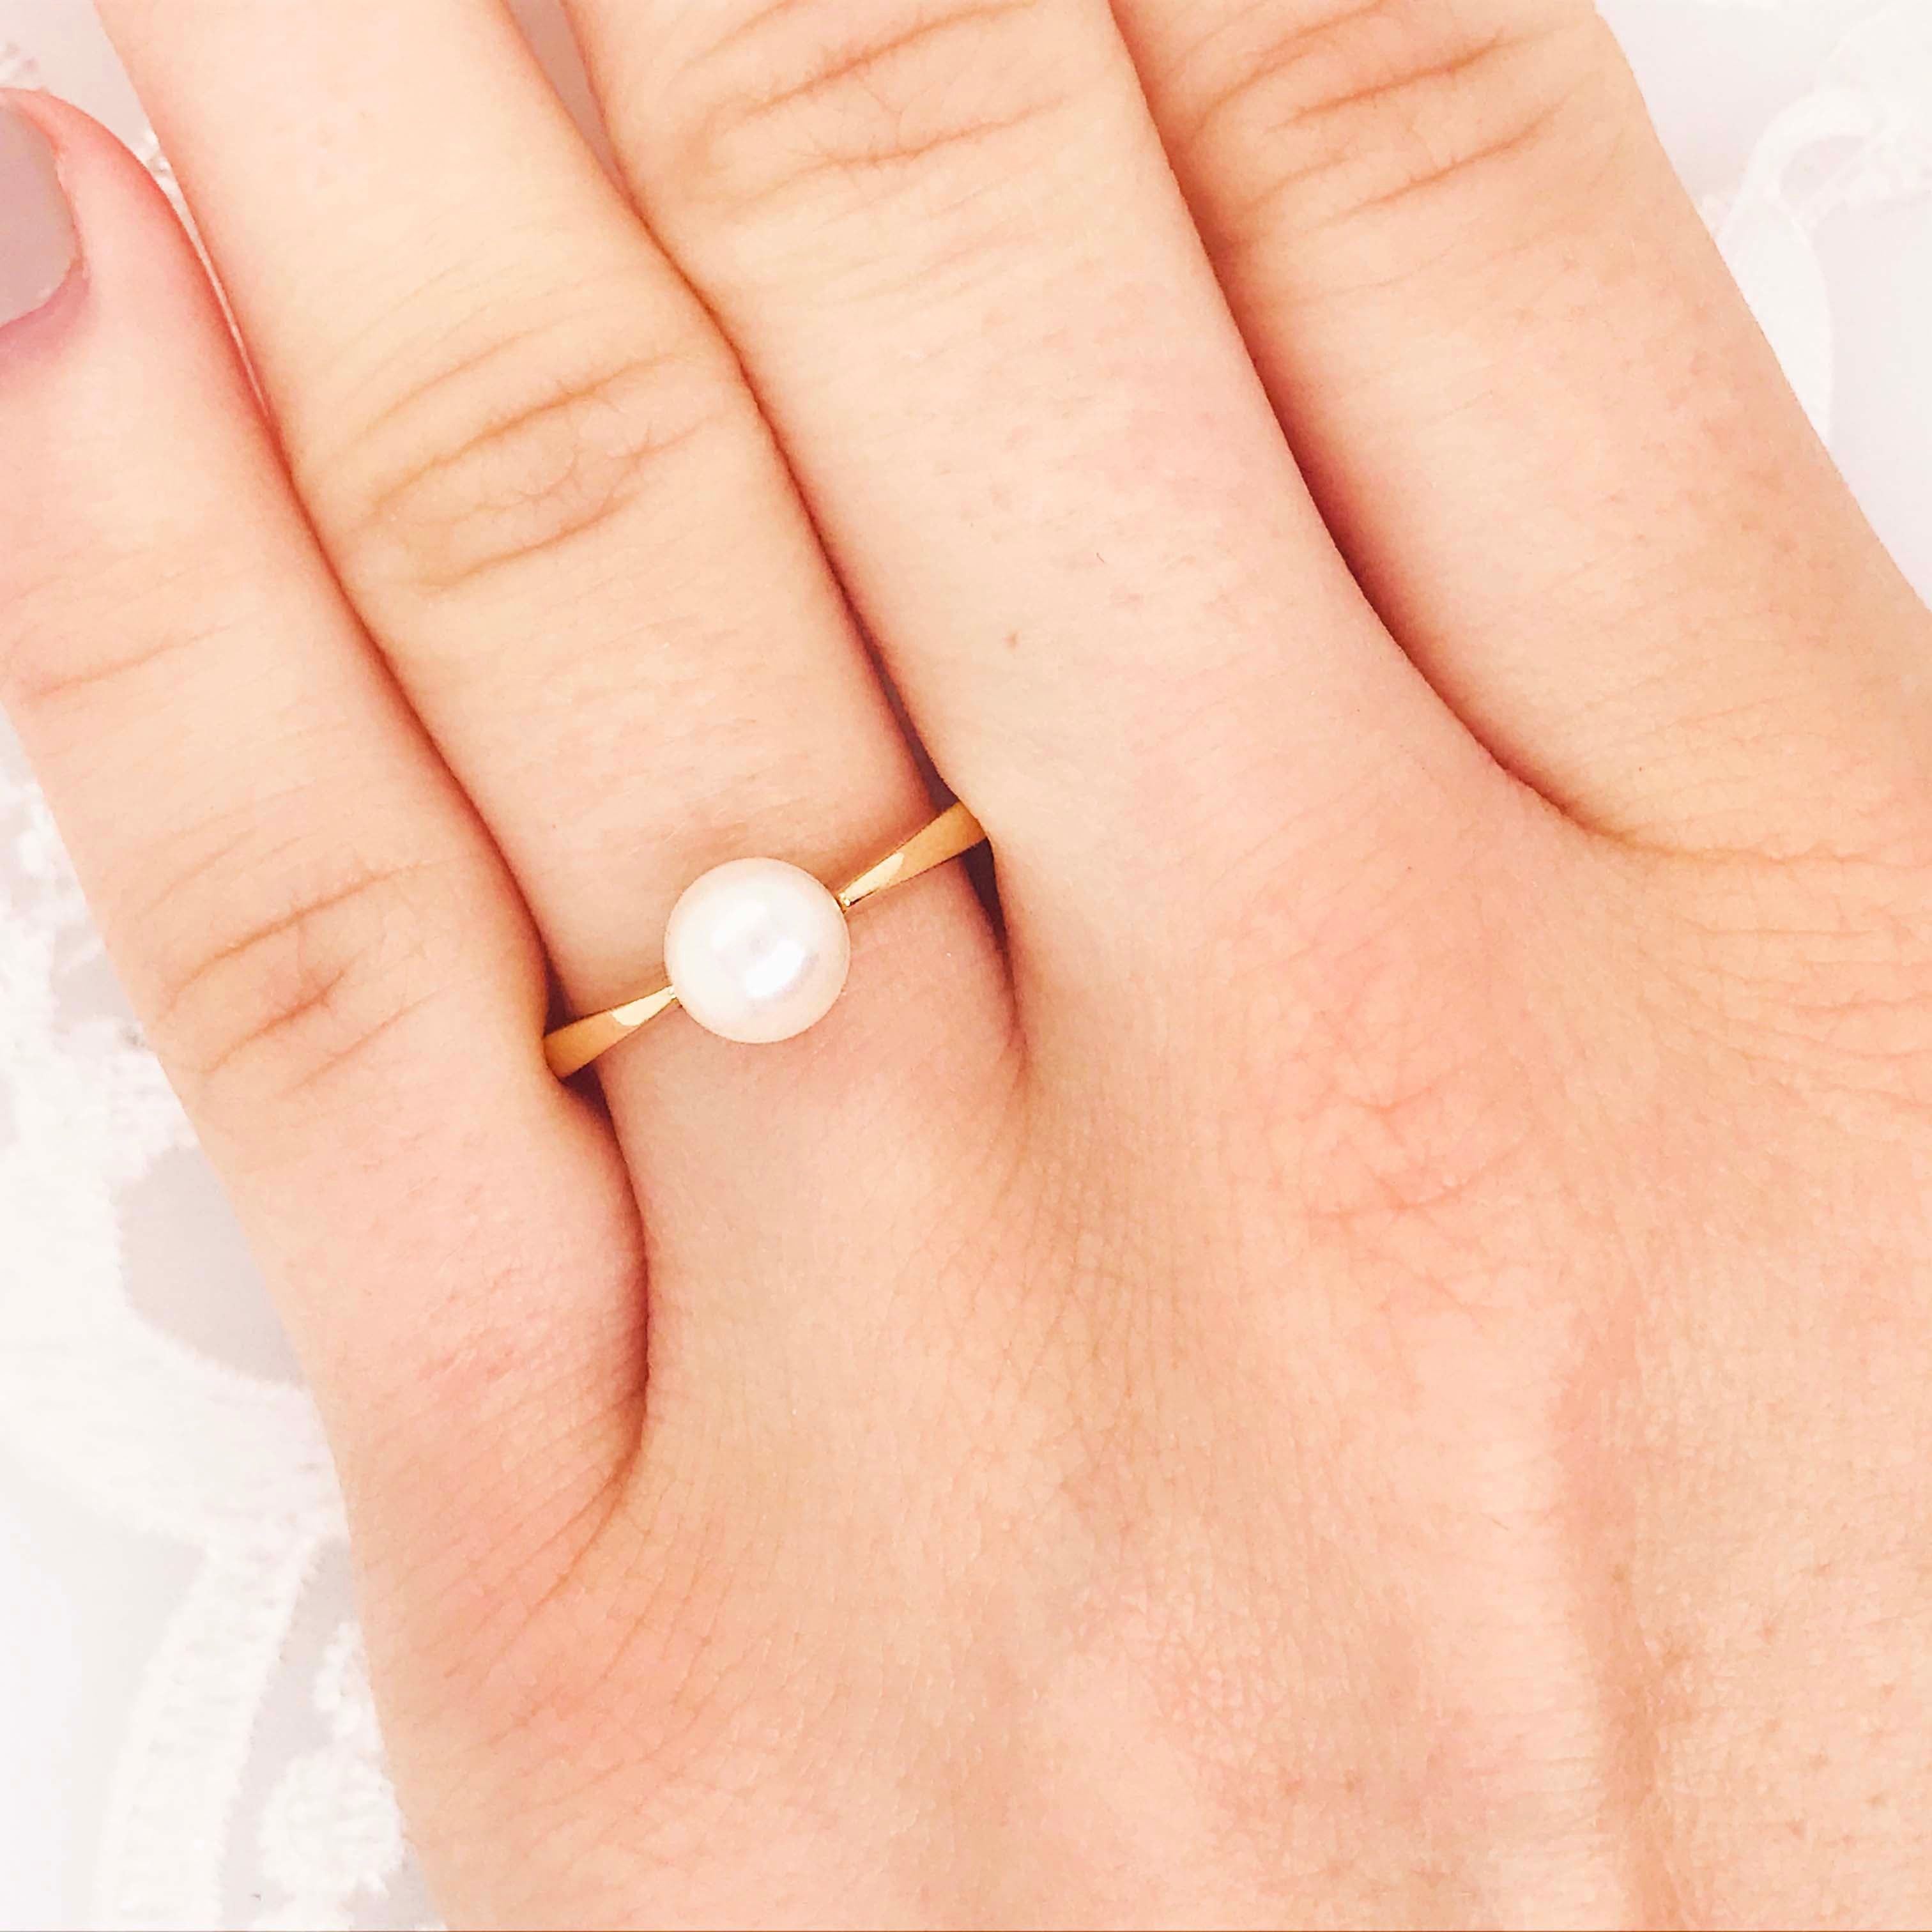 For Sale:  Akoya Pearl Solitaire Ring with Genuine Round Akoya Pearl in 14 Karat Gold 3